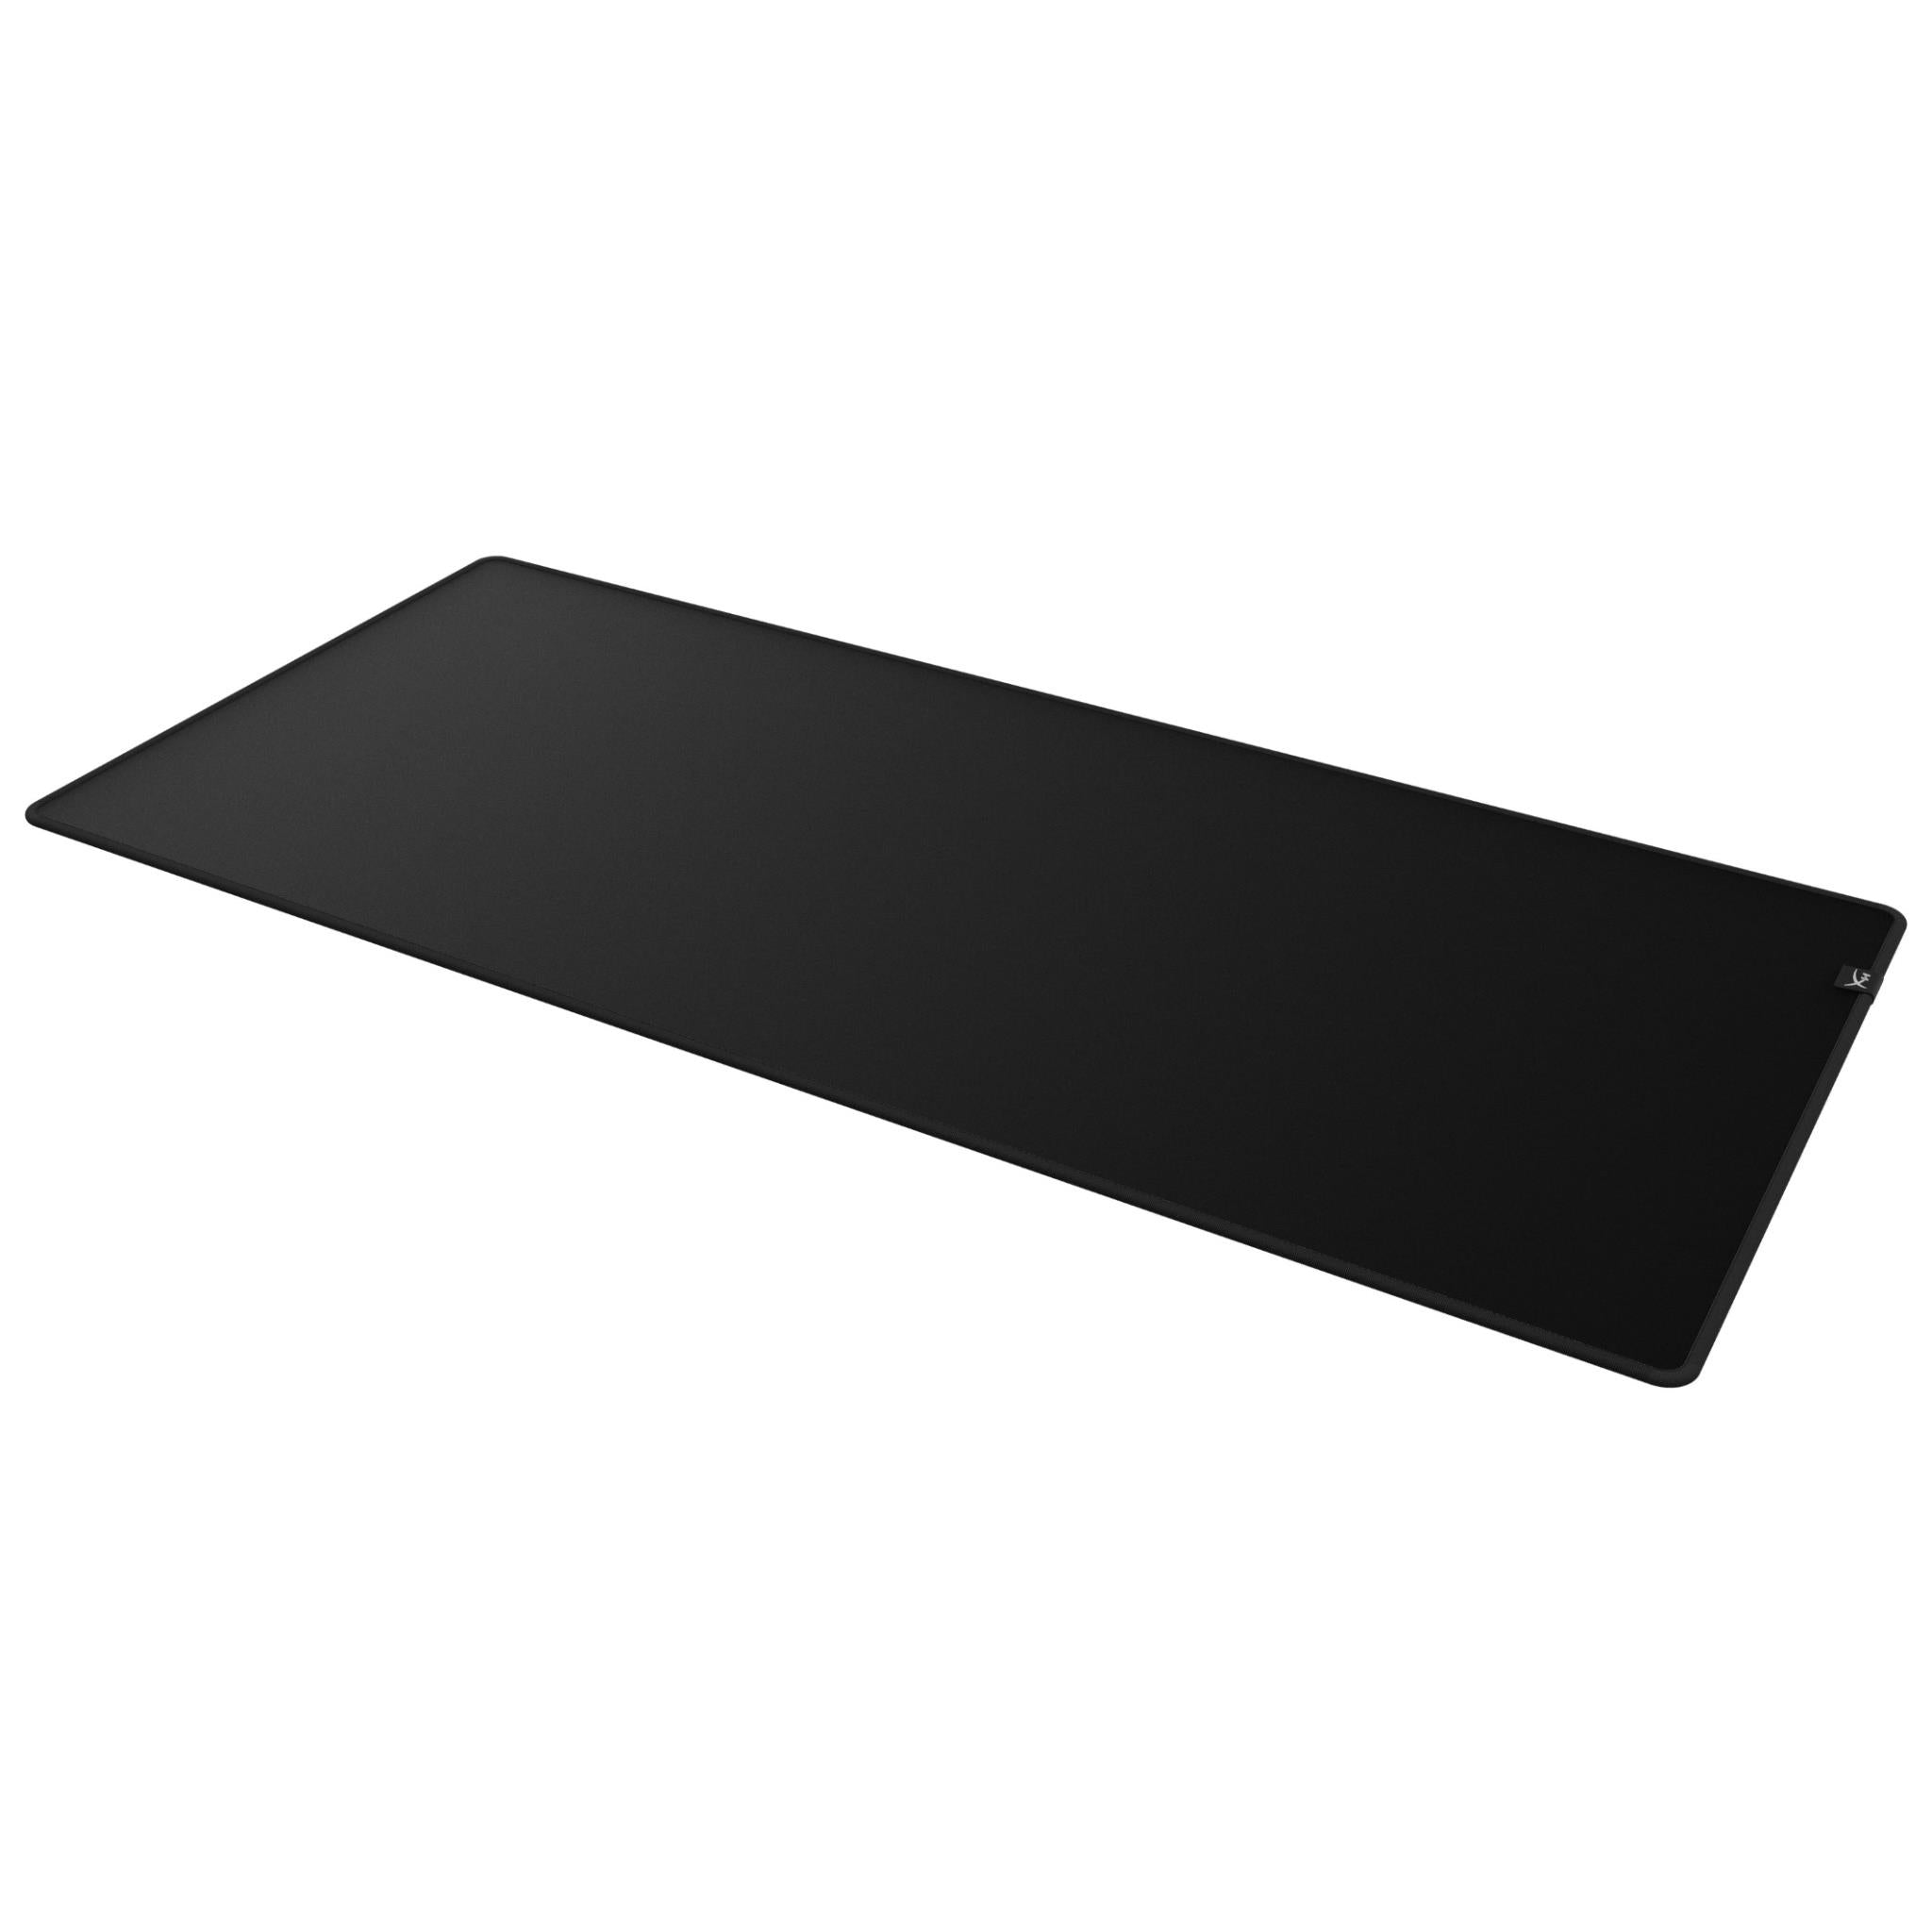 New SE.Merch Item: XXL Gaming Mouse pads